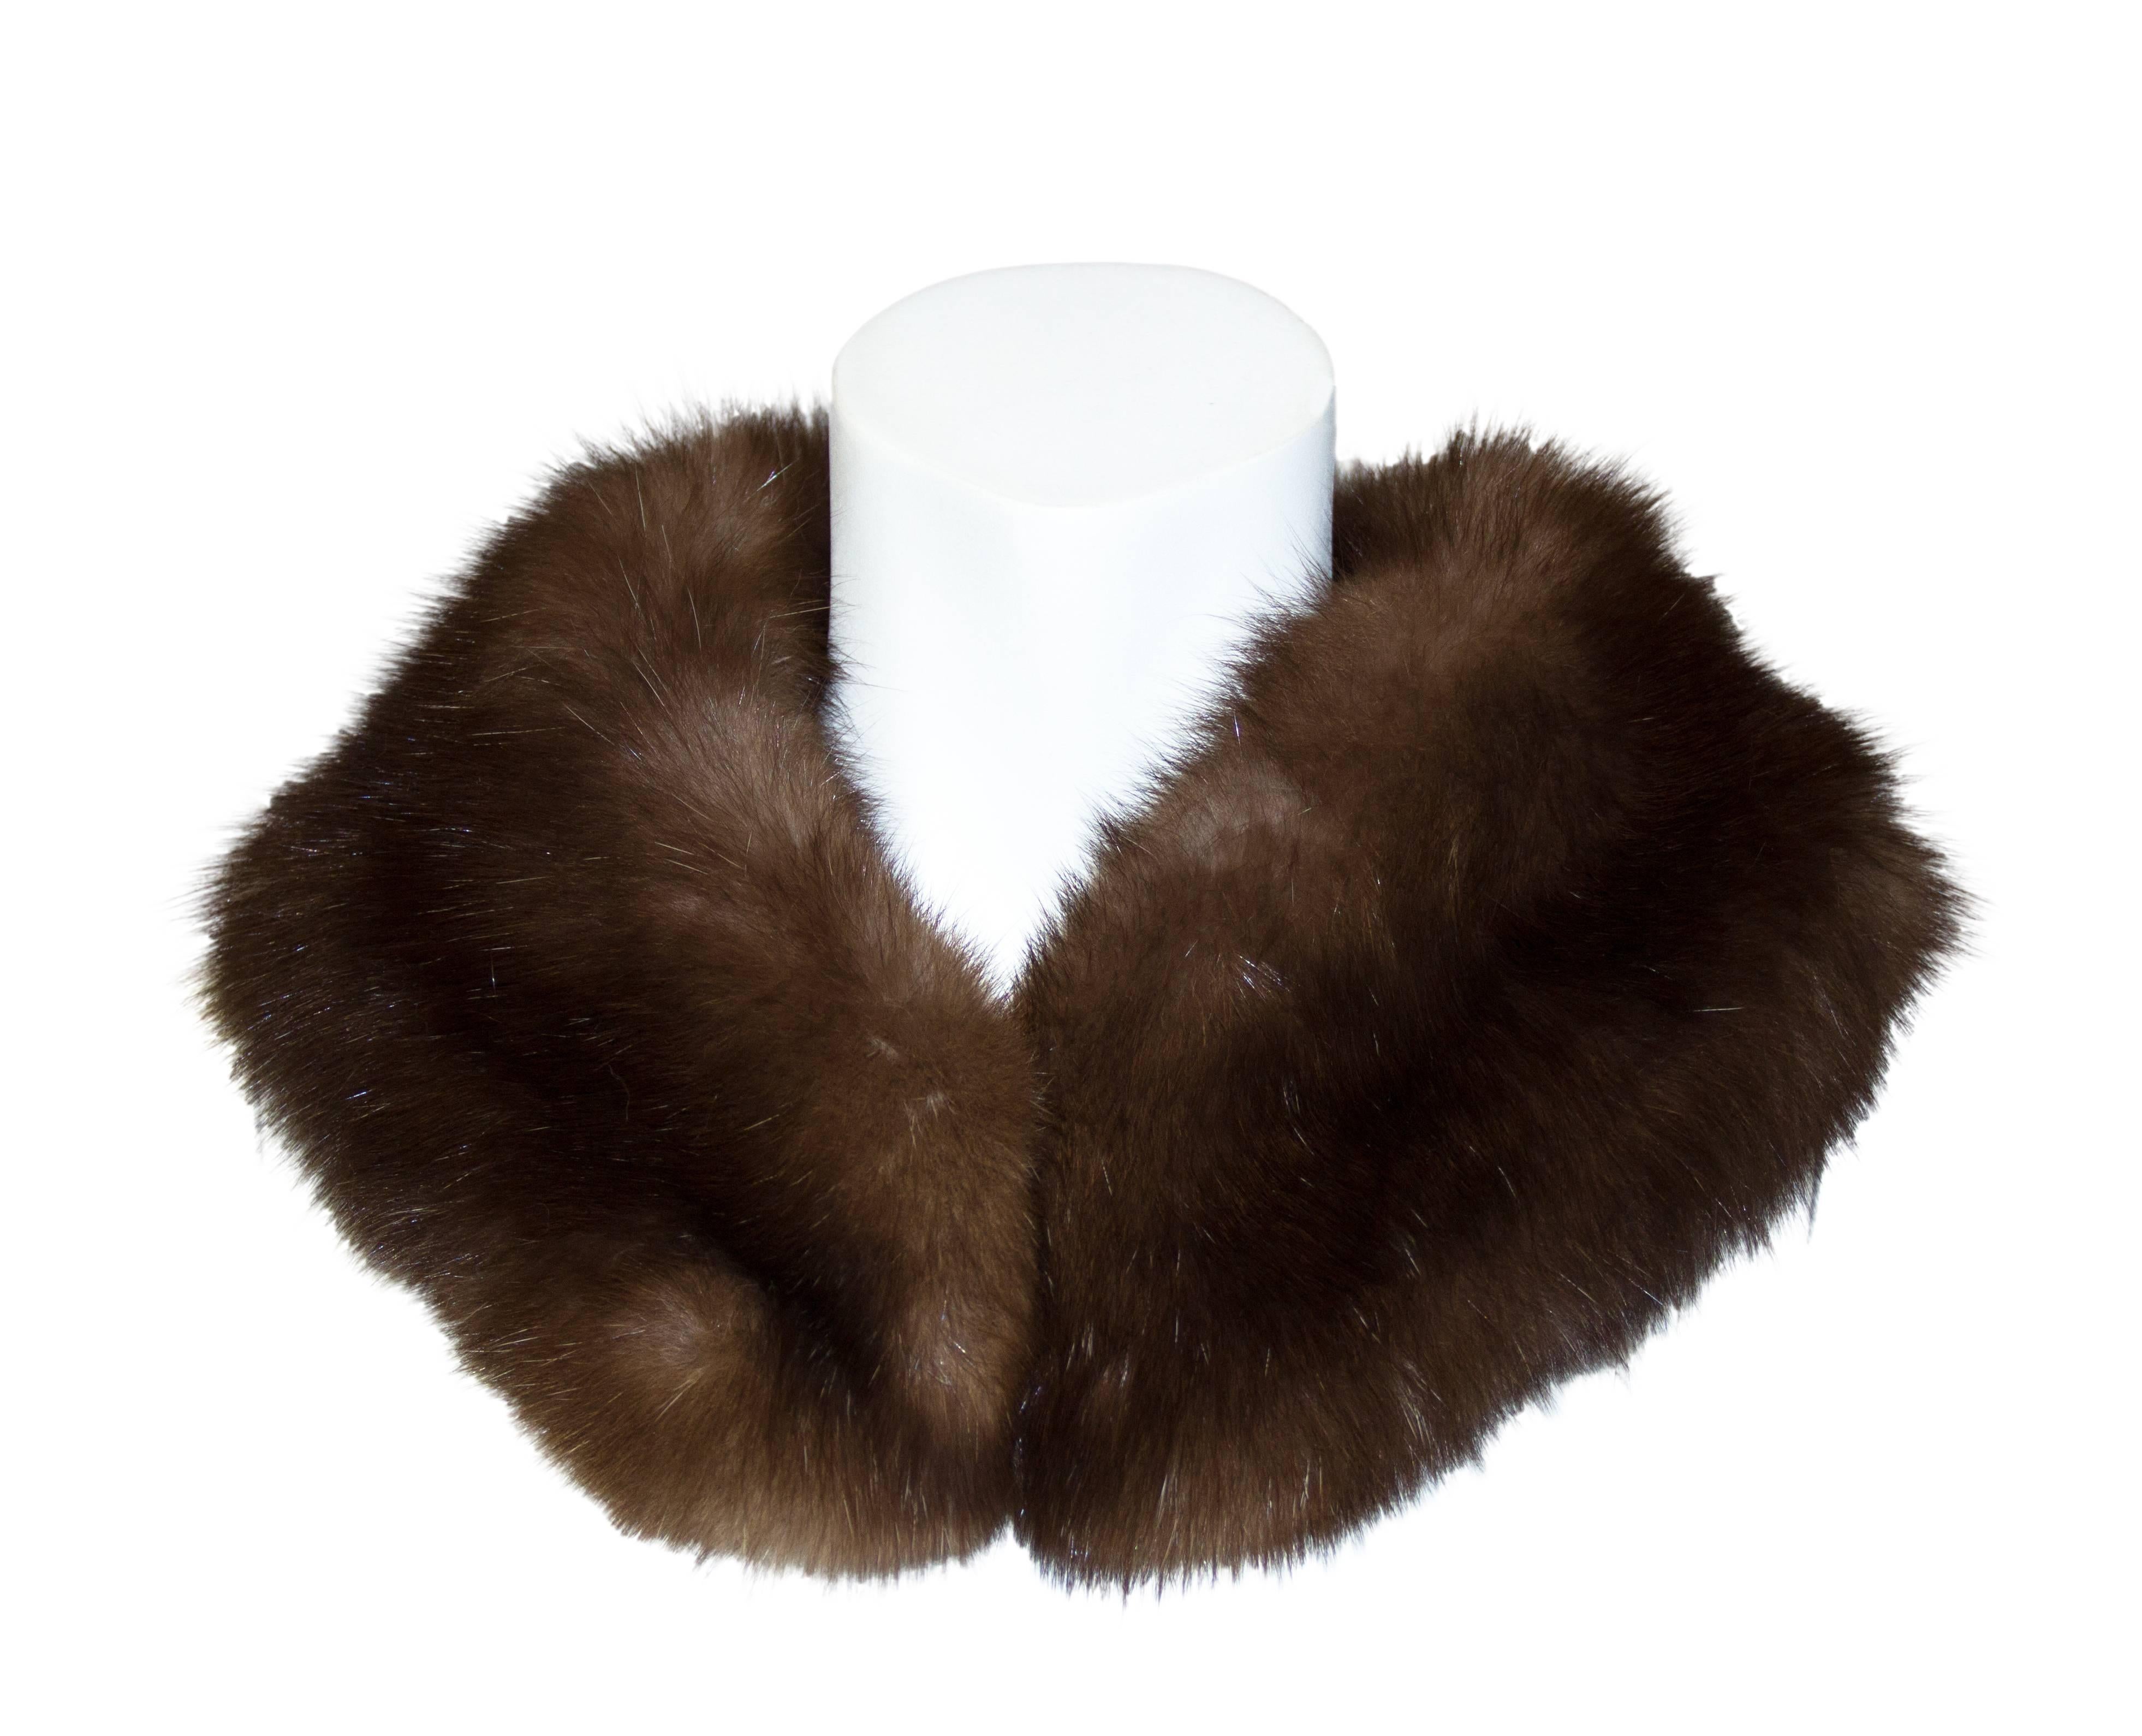 1960s single row sable stand-up collar. Interior fur hook and eye. Interior finished in velvet ribbon, monogrammed BCM. 